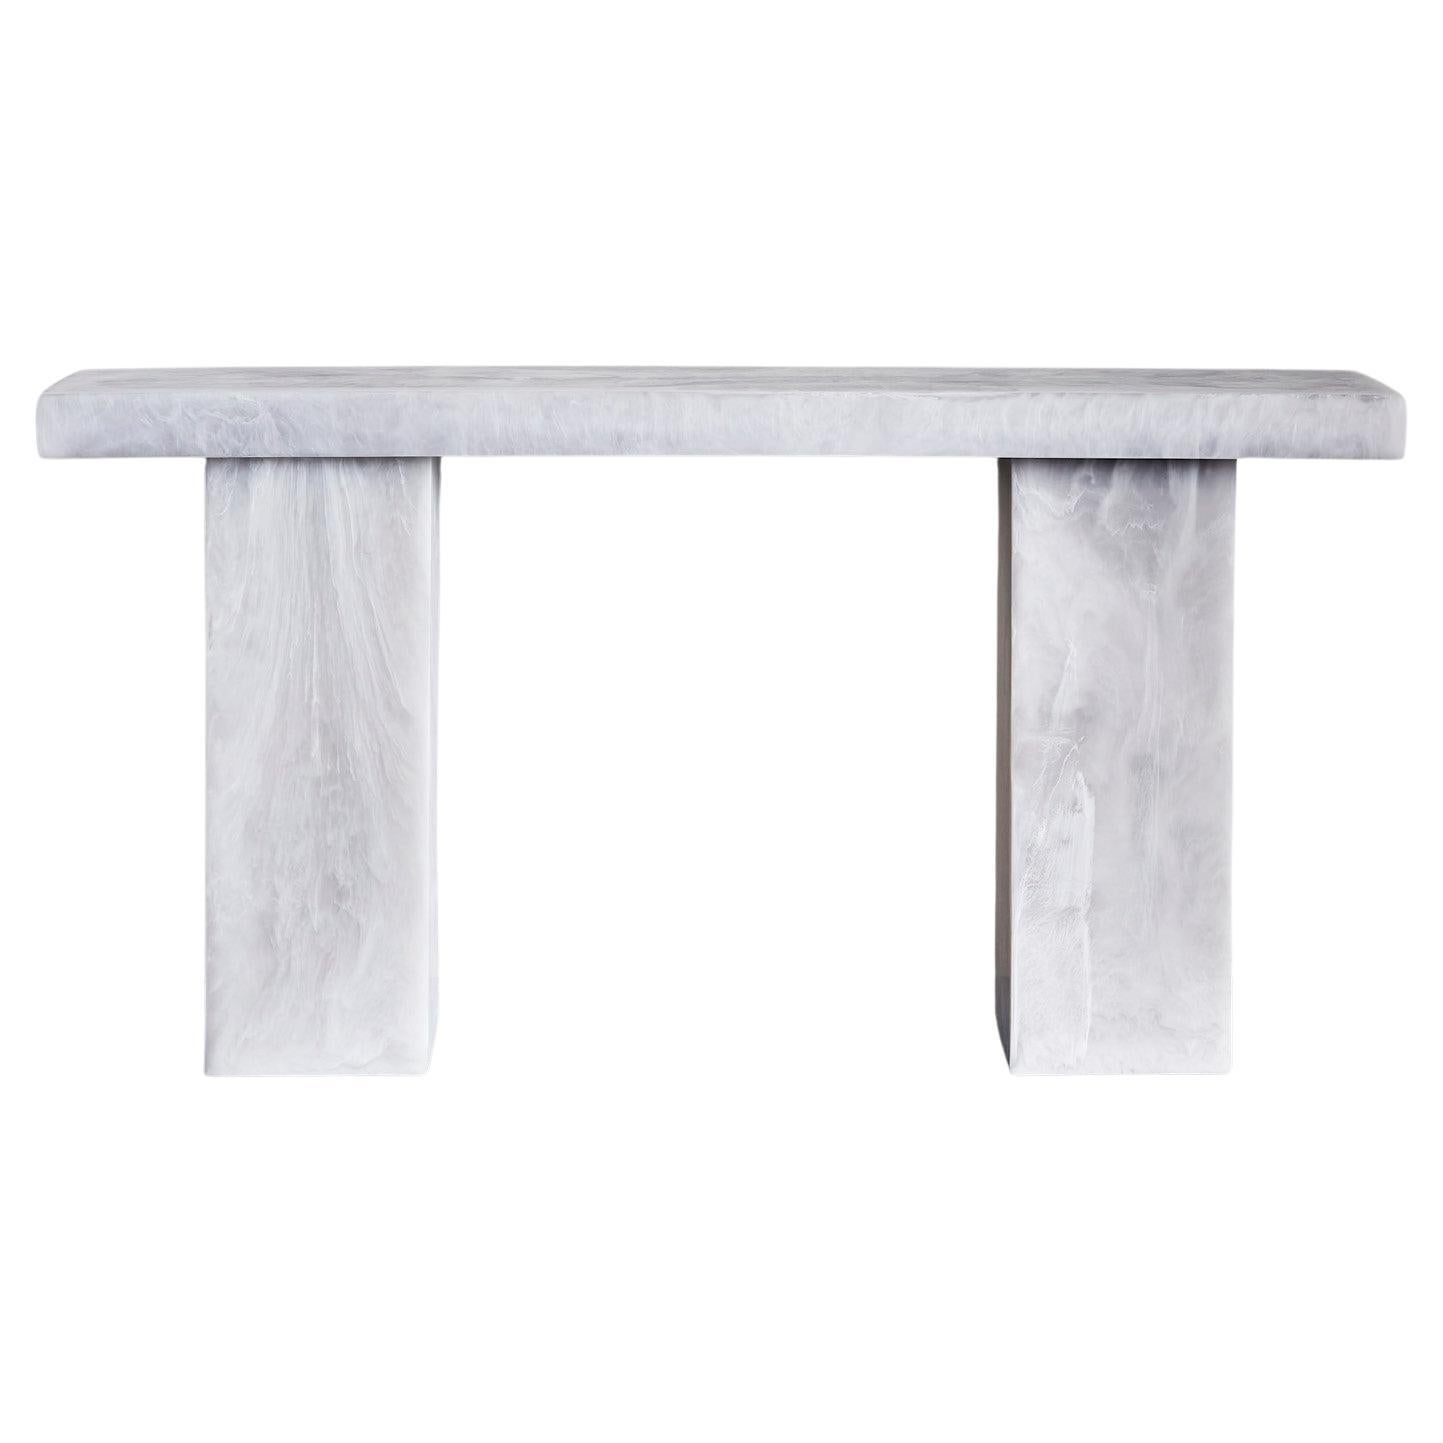 Studio Sturdy Lions Console Table – White Marble Resin For Sale